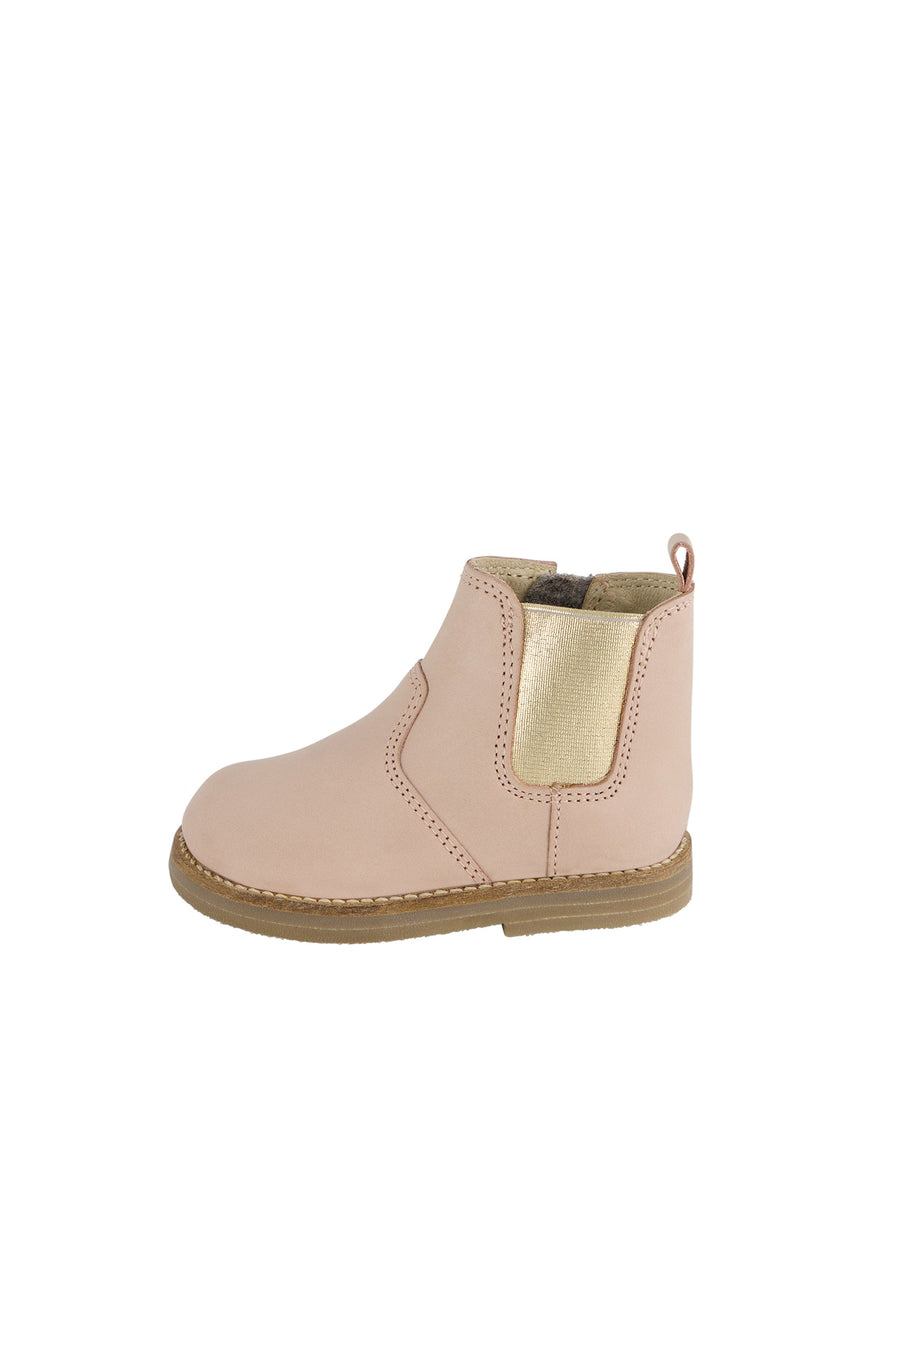 Leather Boot with Elastic Side - Blush Childrens Footwear from Jamie Kay USA